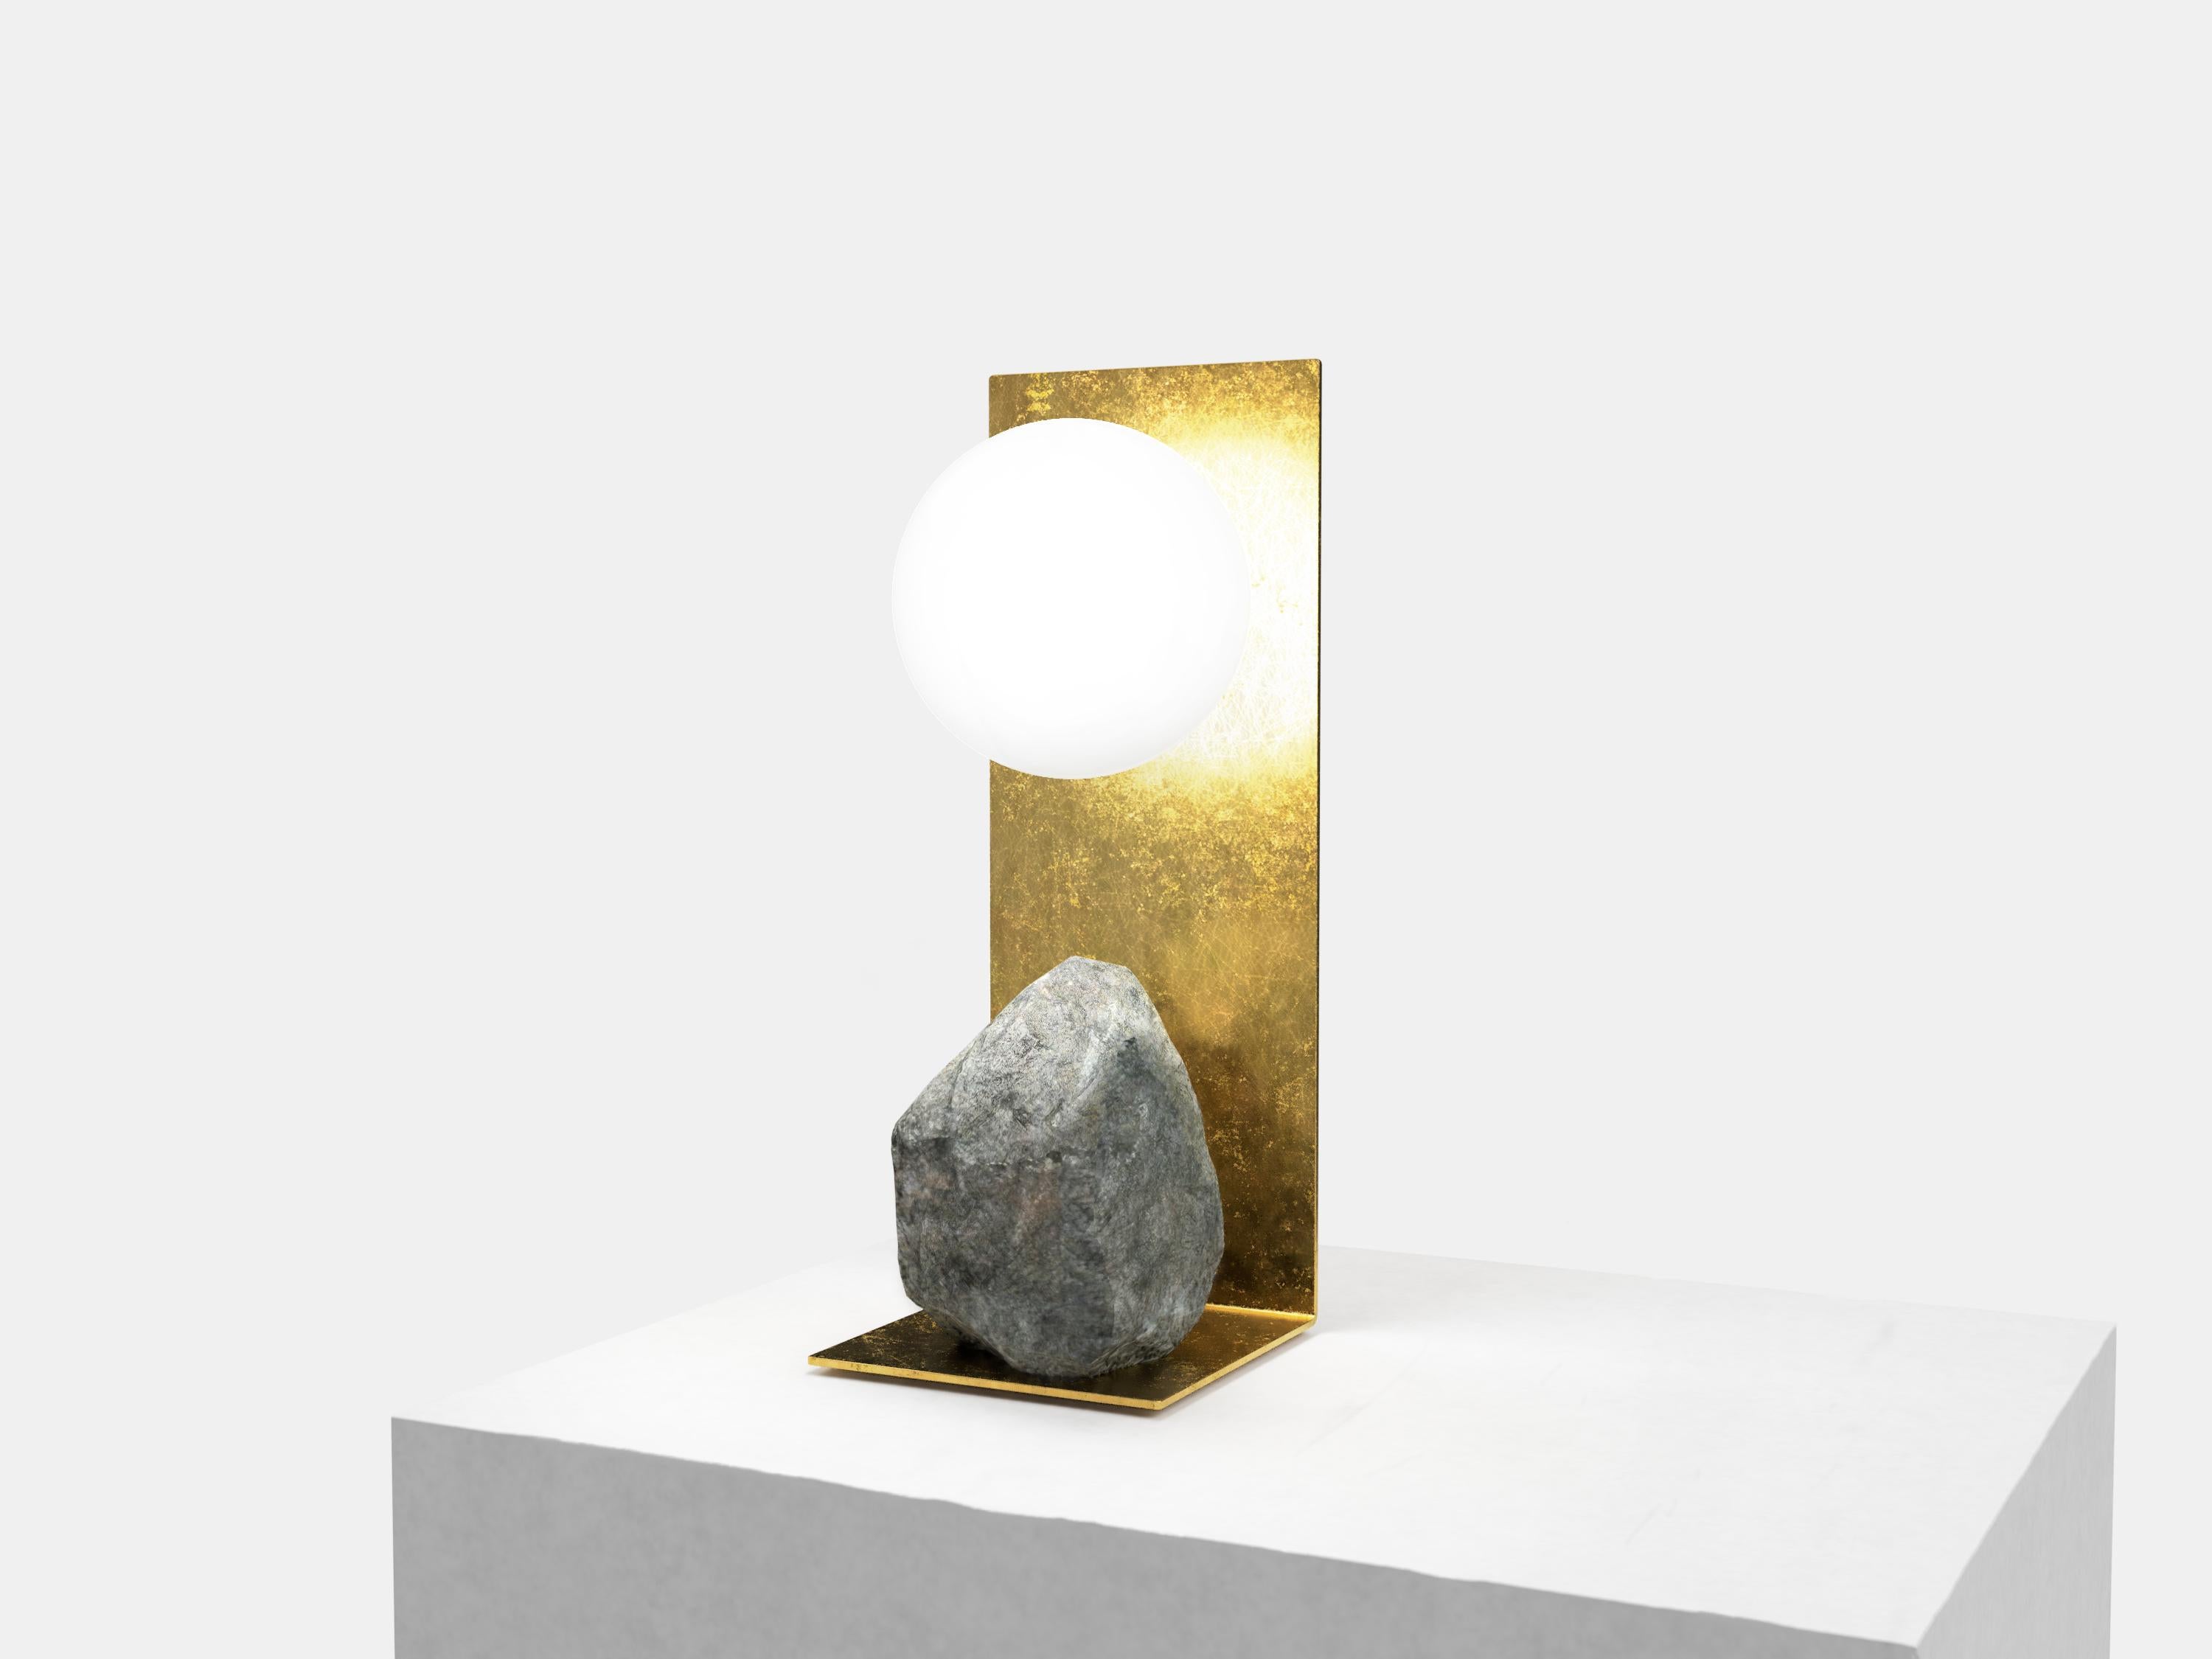 Hand brushed brass and stone table lamp by Batten and Kamp
Shelter to Ground collection
Signed
Limited edition of 25 + 2 AP
Dimensions: W 14 x D 14 x H 33 cm
Materials: Hand brushed brass, natural stone, tinted glass.
LED, electrical components
Each